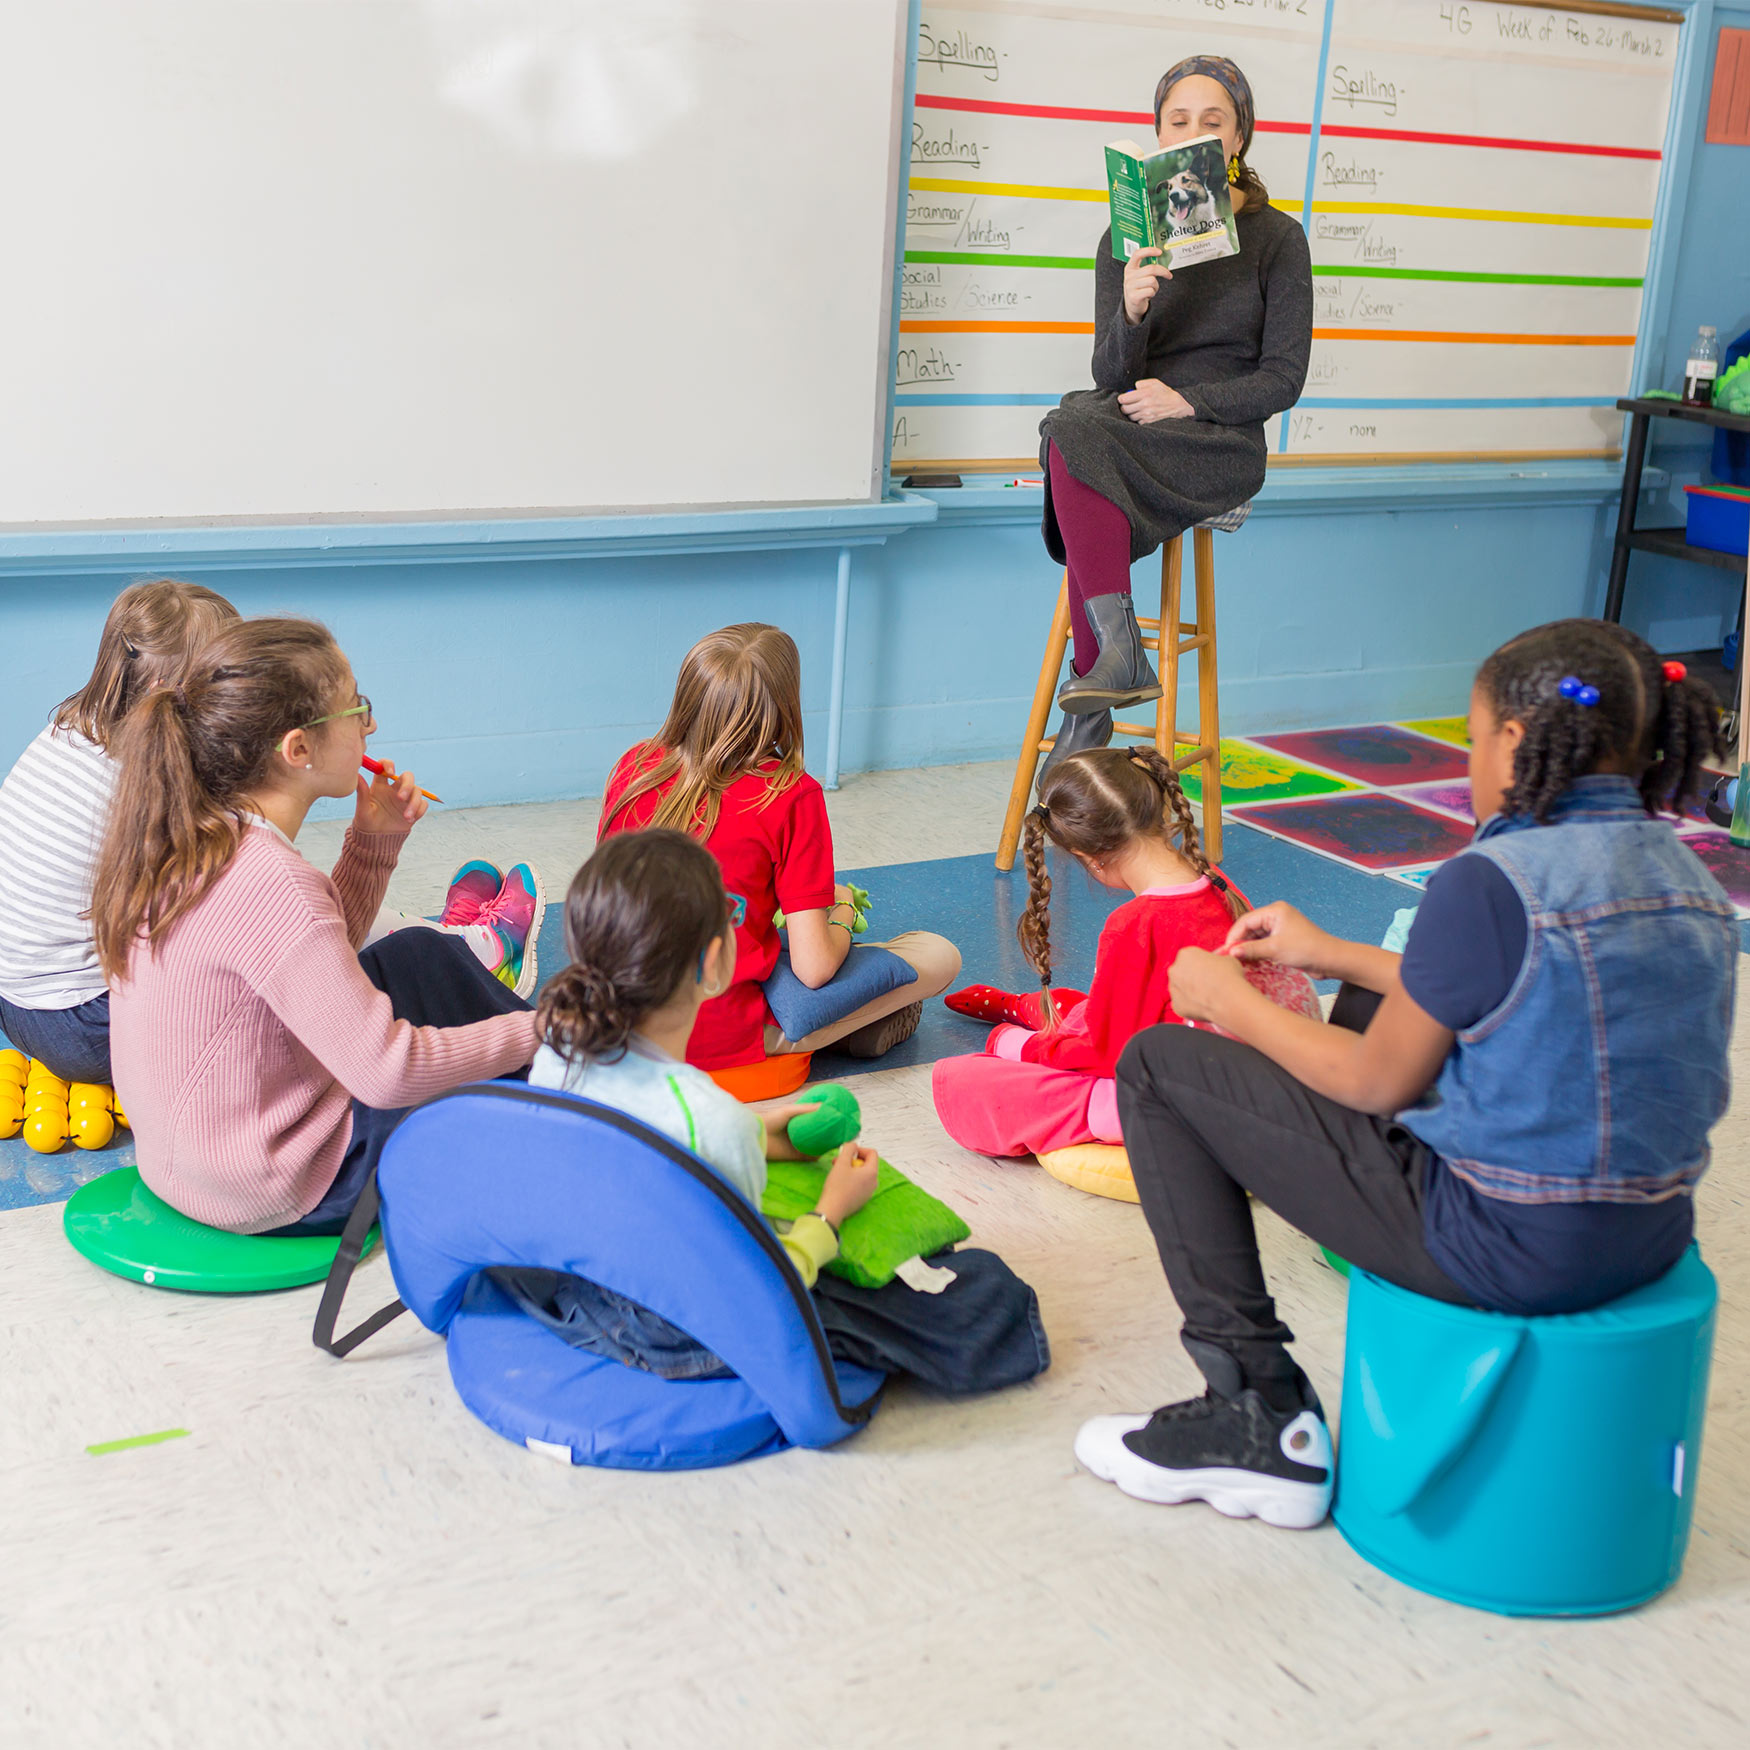 How To Choose Flexible Classroom Seating